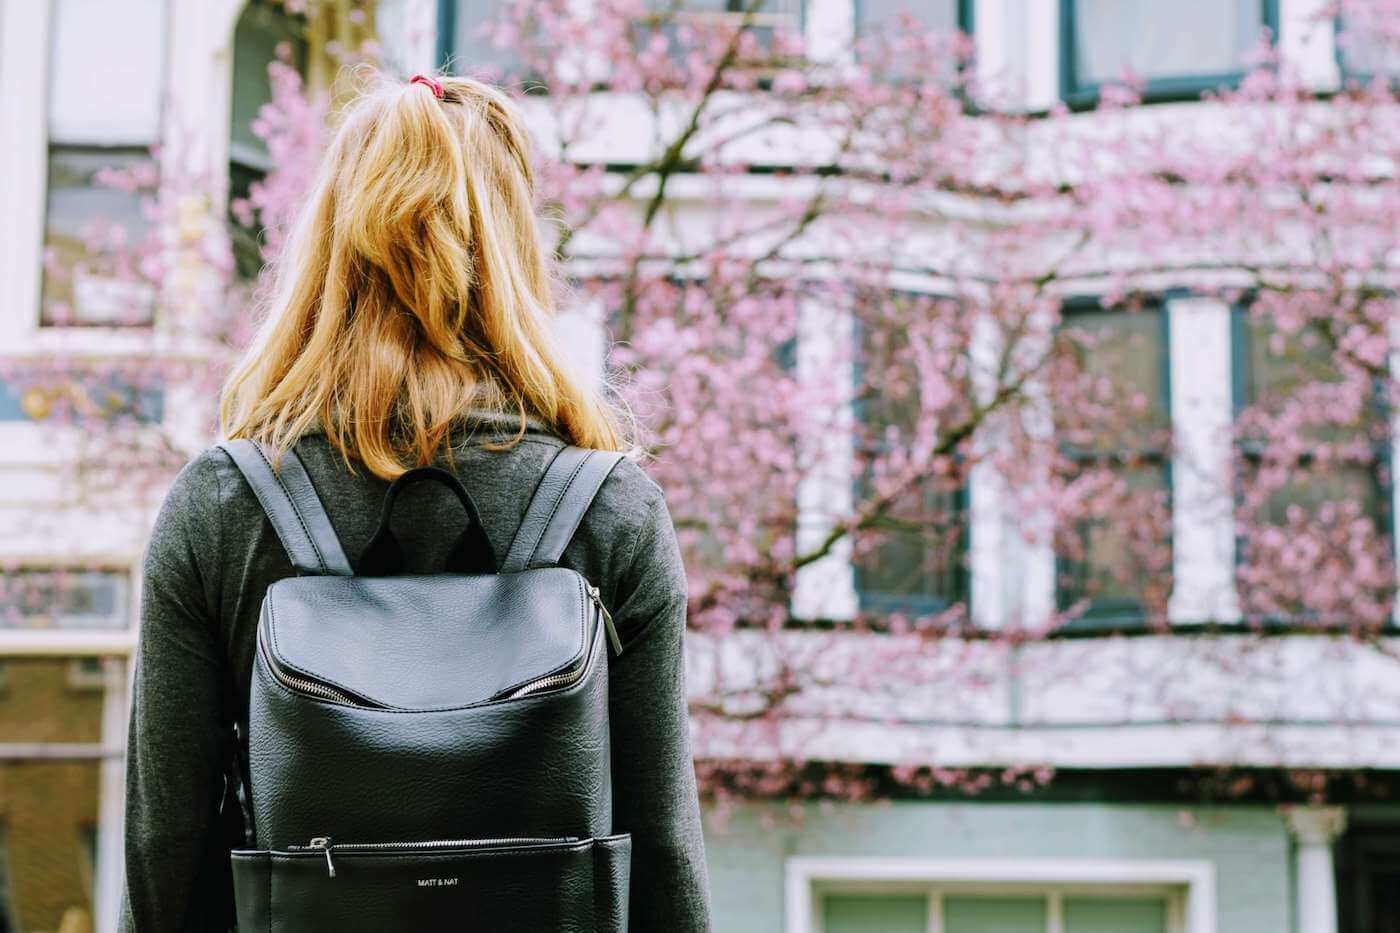 College Student wearing backpack